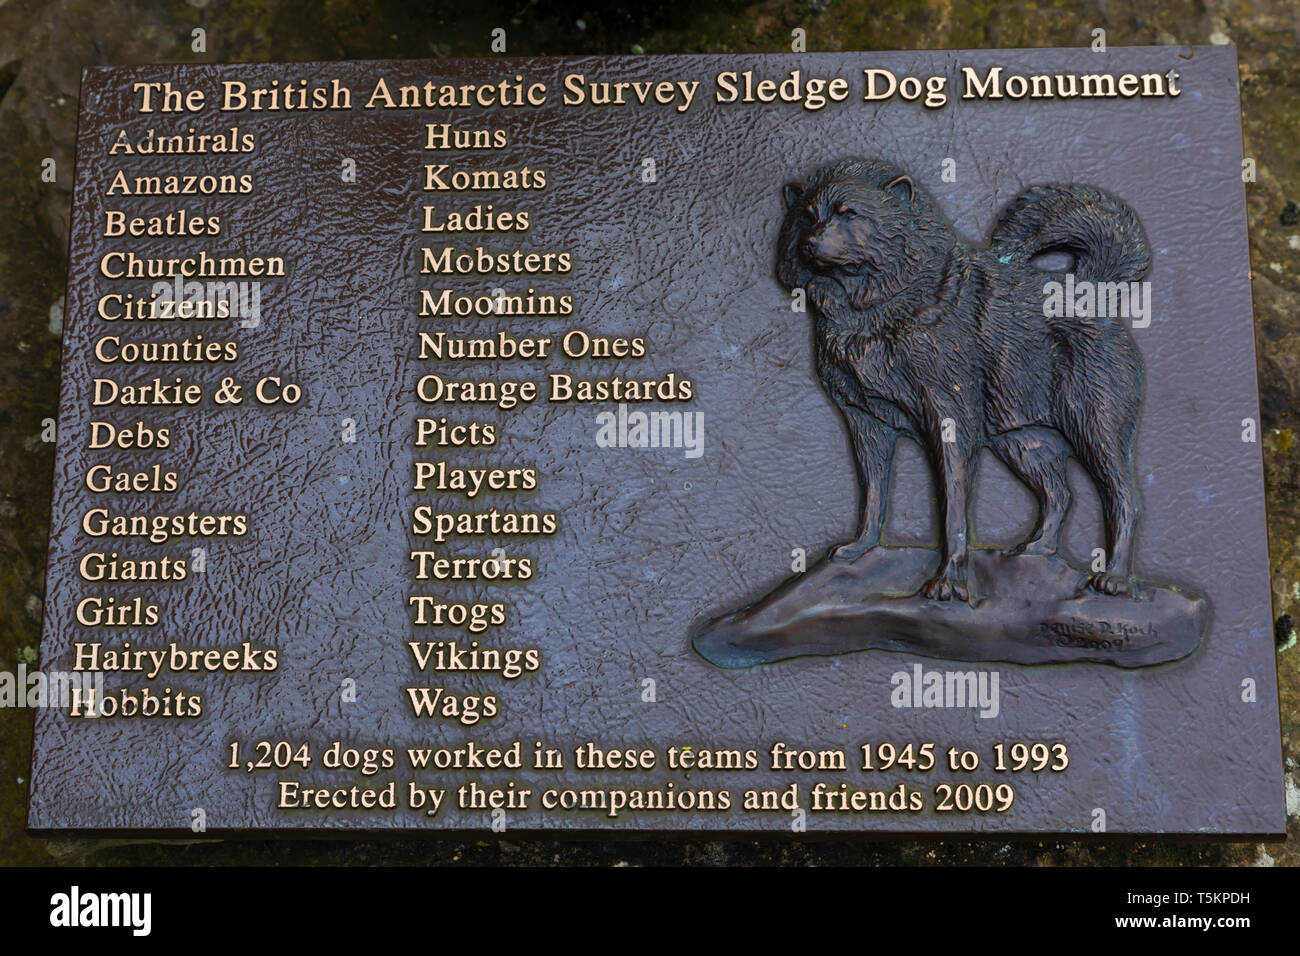 Monument to the sledge dog teams from the Scott antarctic survey at the Scott Polar Research Institute, Hills Road,  Cambridge, Cambridgeshire Stock Photo